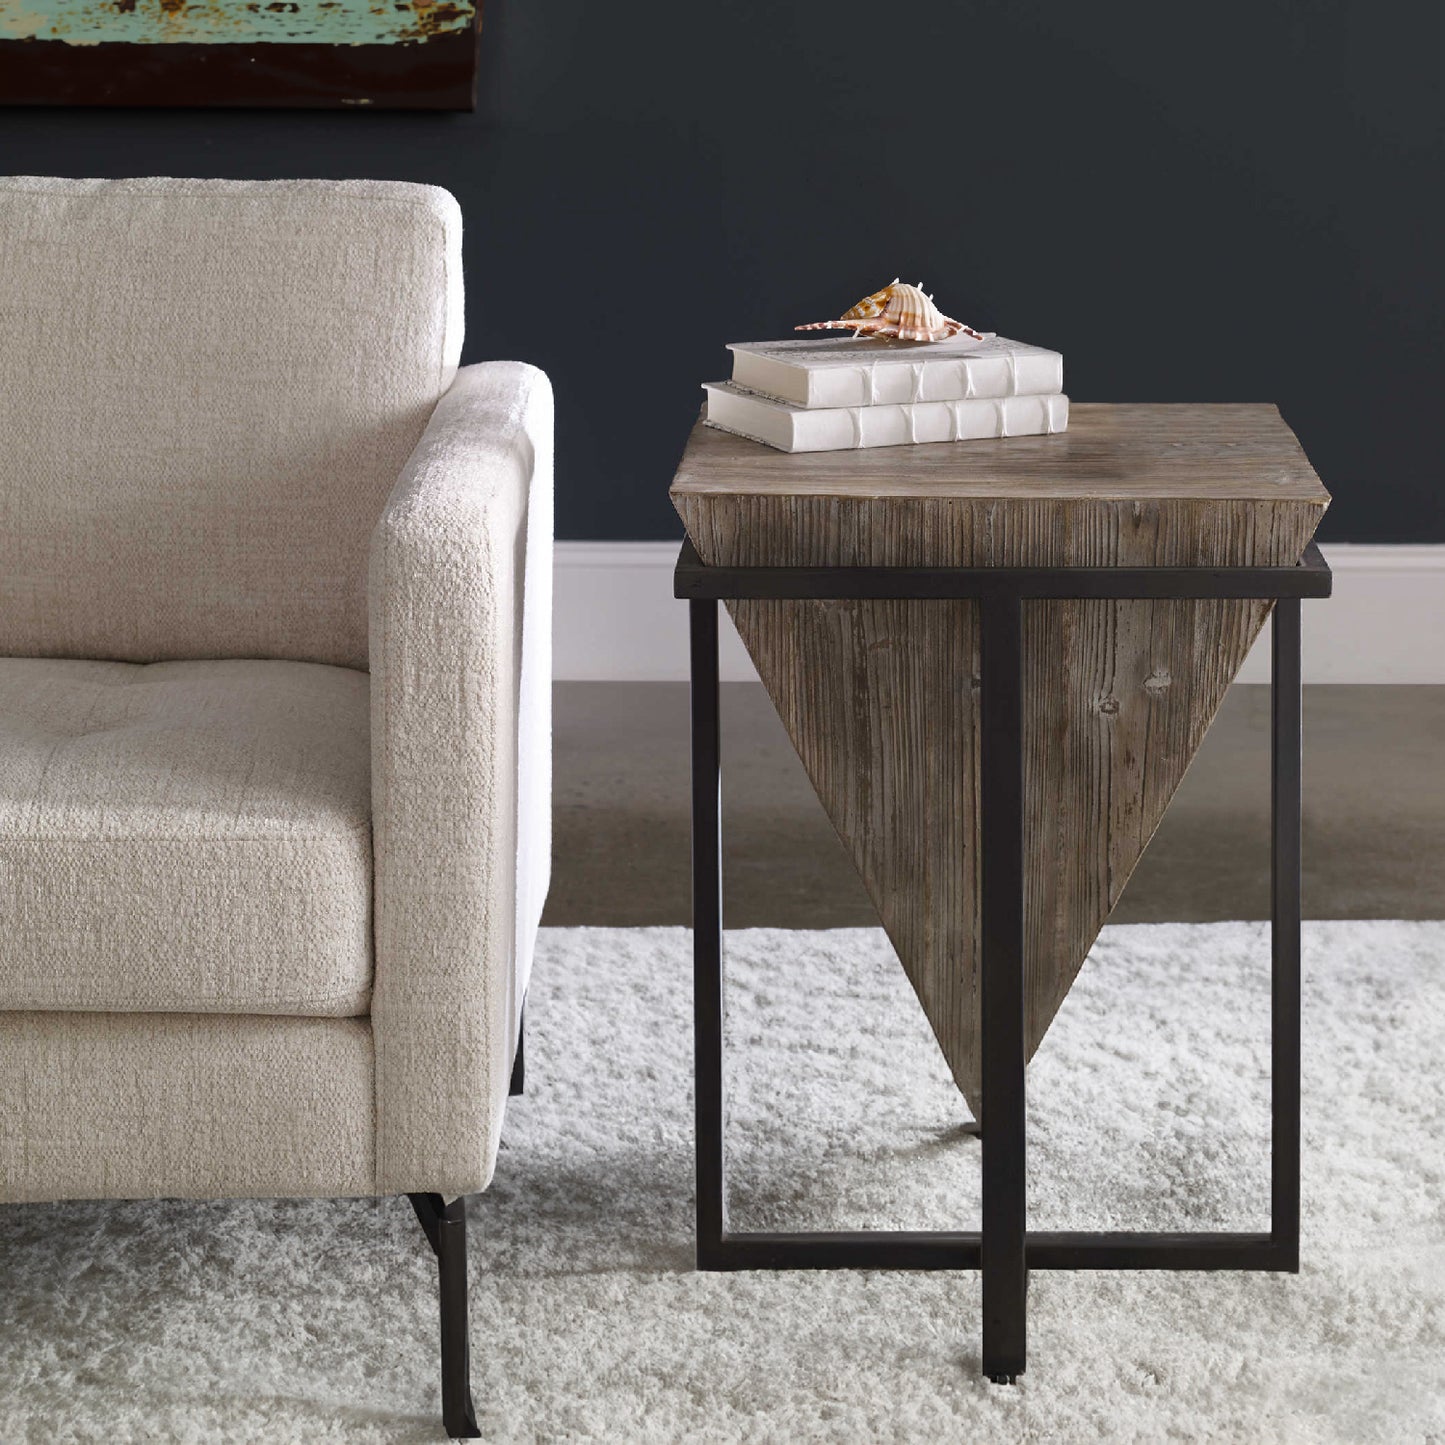 Industrial end table with white wool rug and decorative white chair.